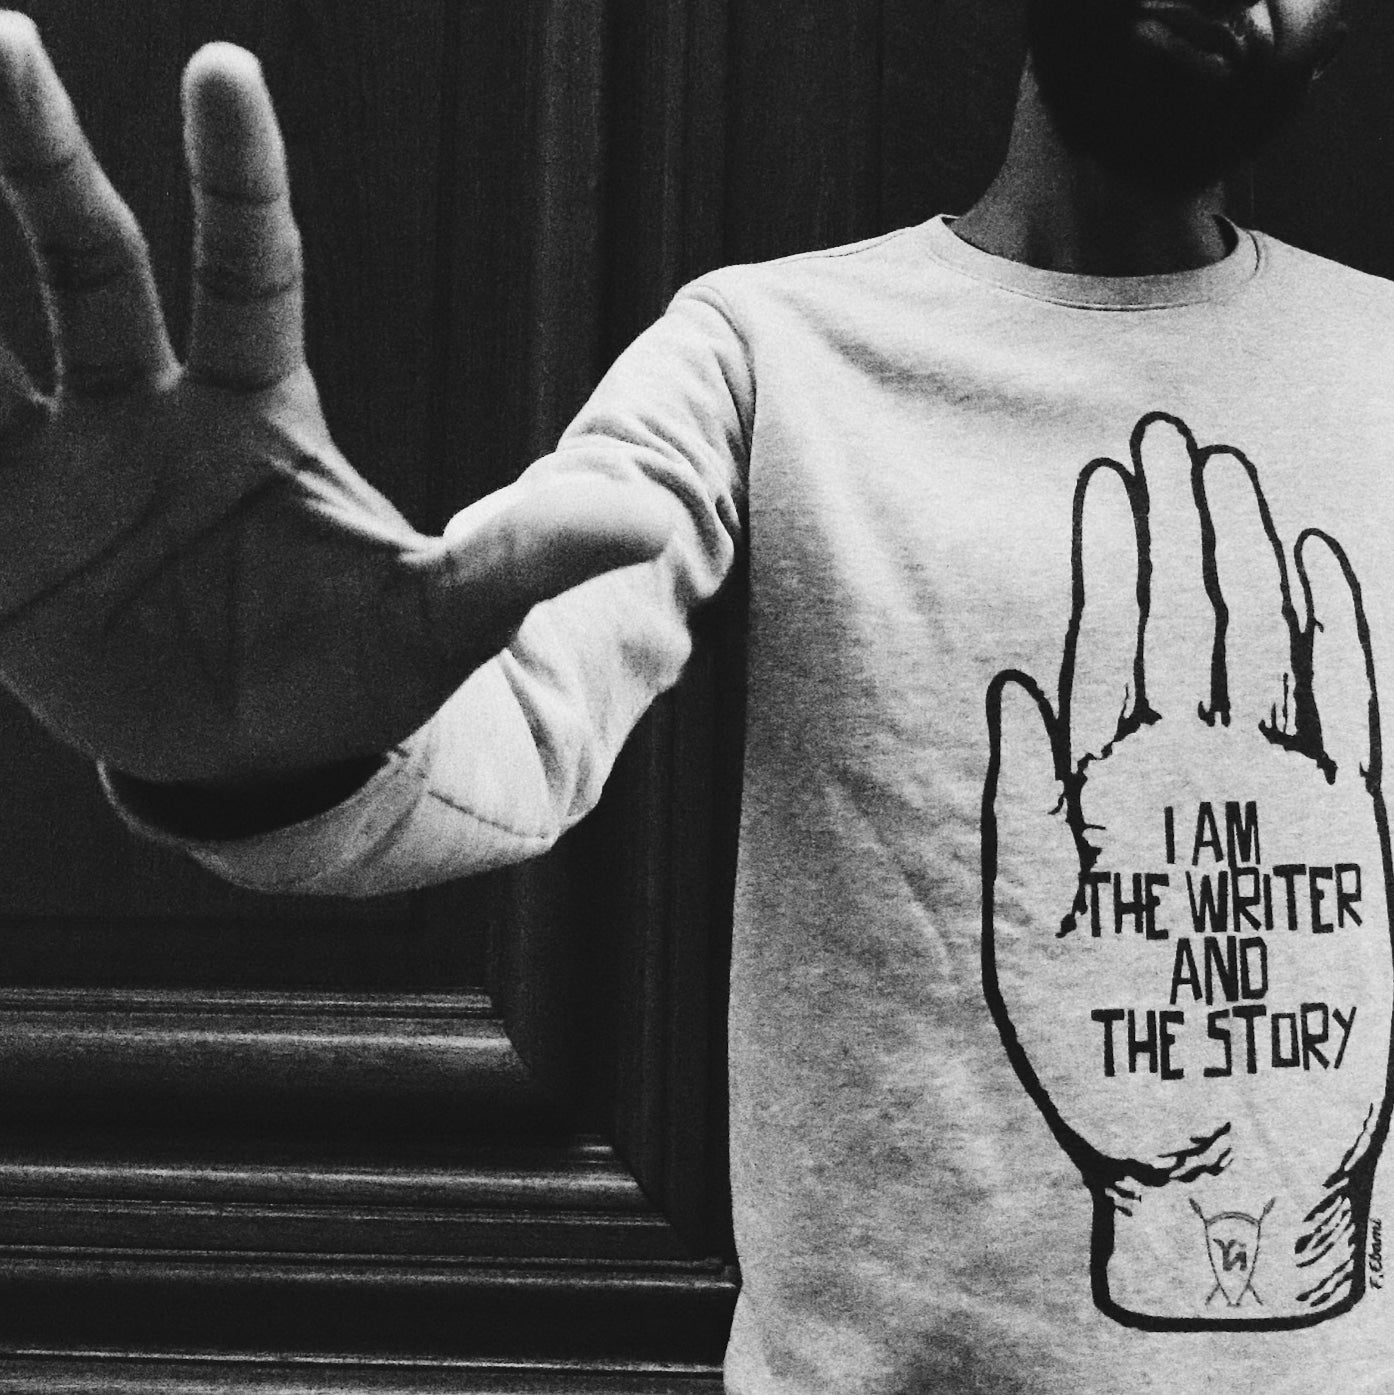 Sweat Hand "I'm the Writer and the Story" par Fred Ebami